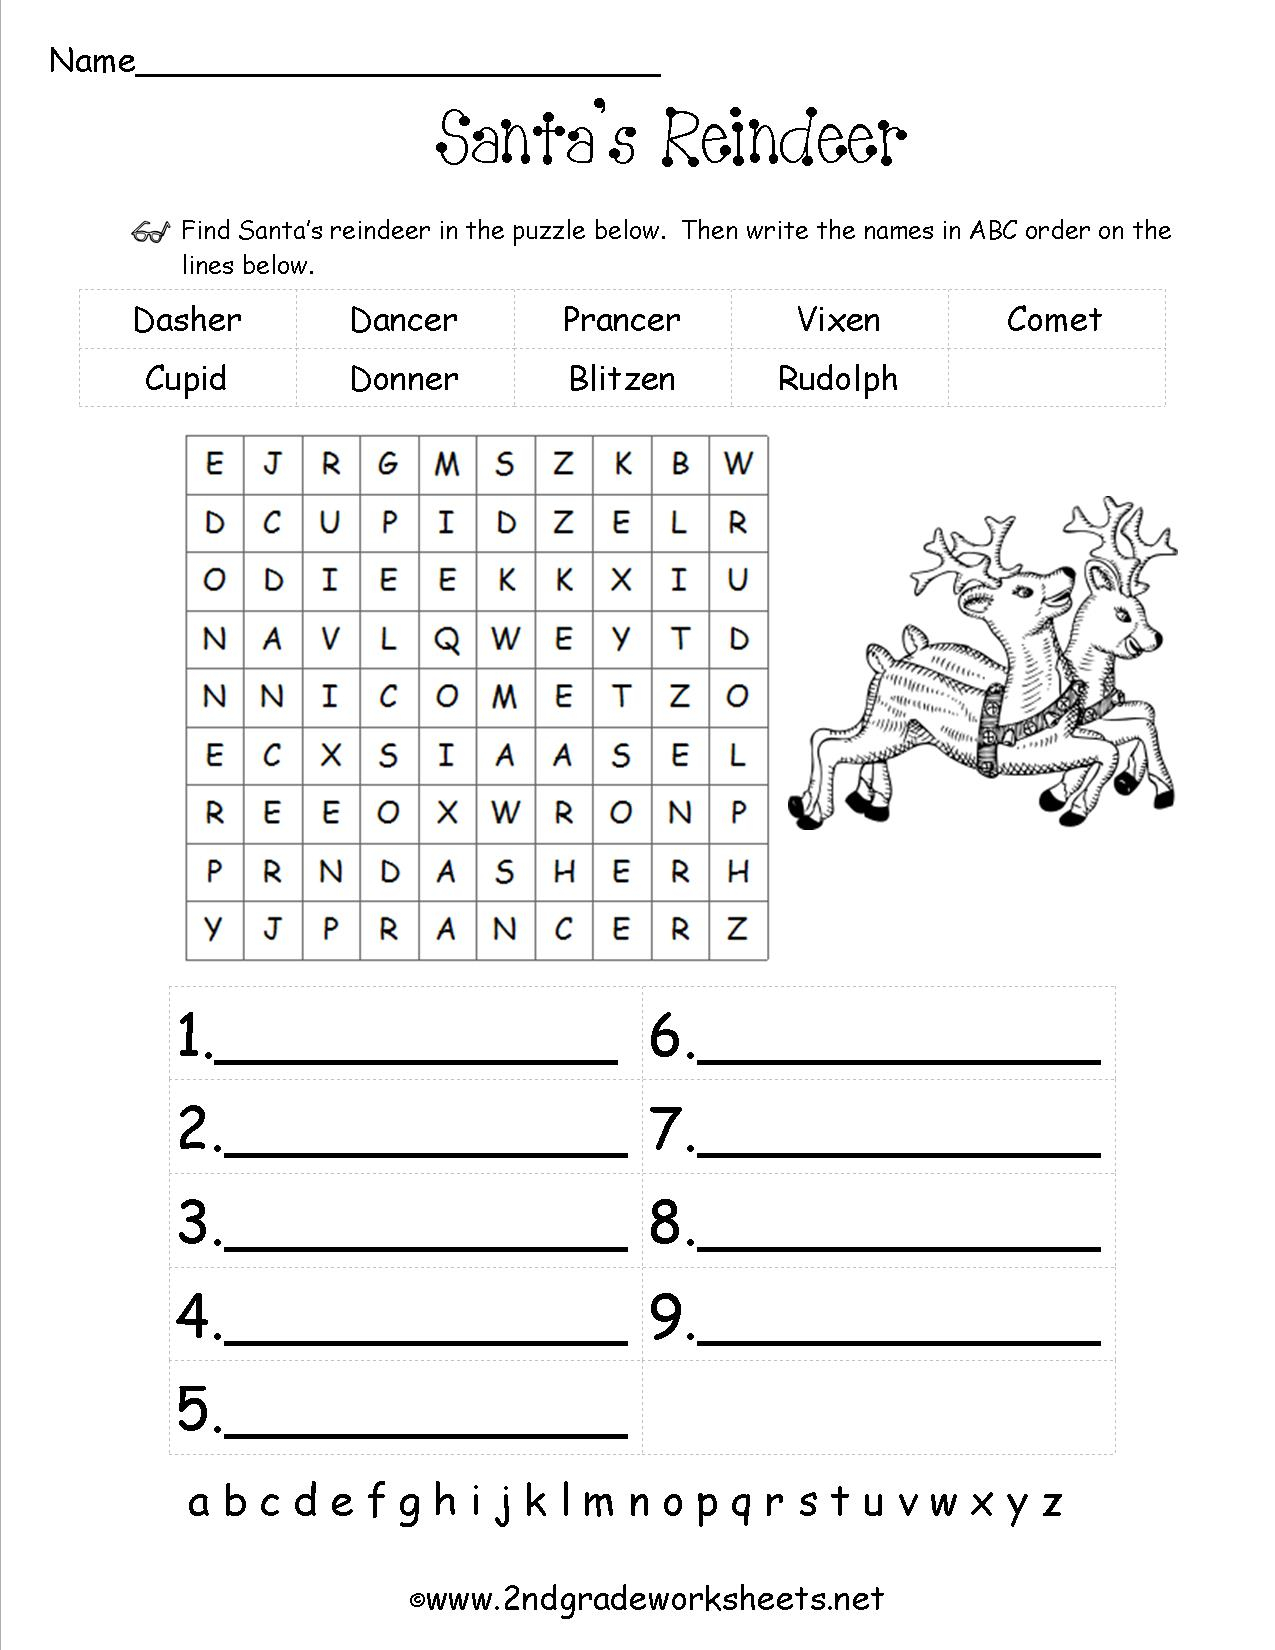 Christmas Worksheets And Printouts Free Second Grade Math